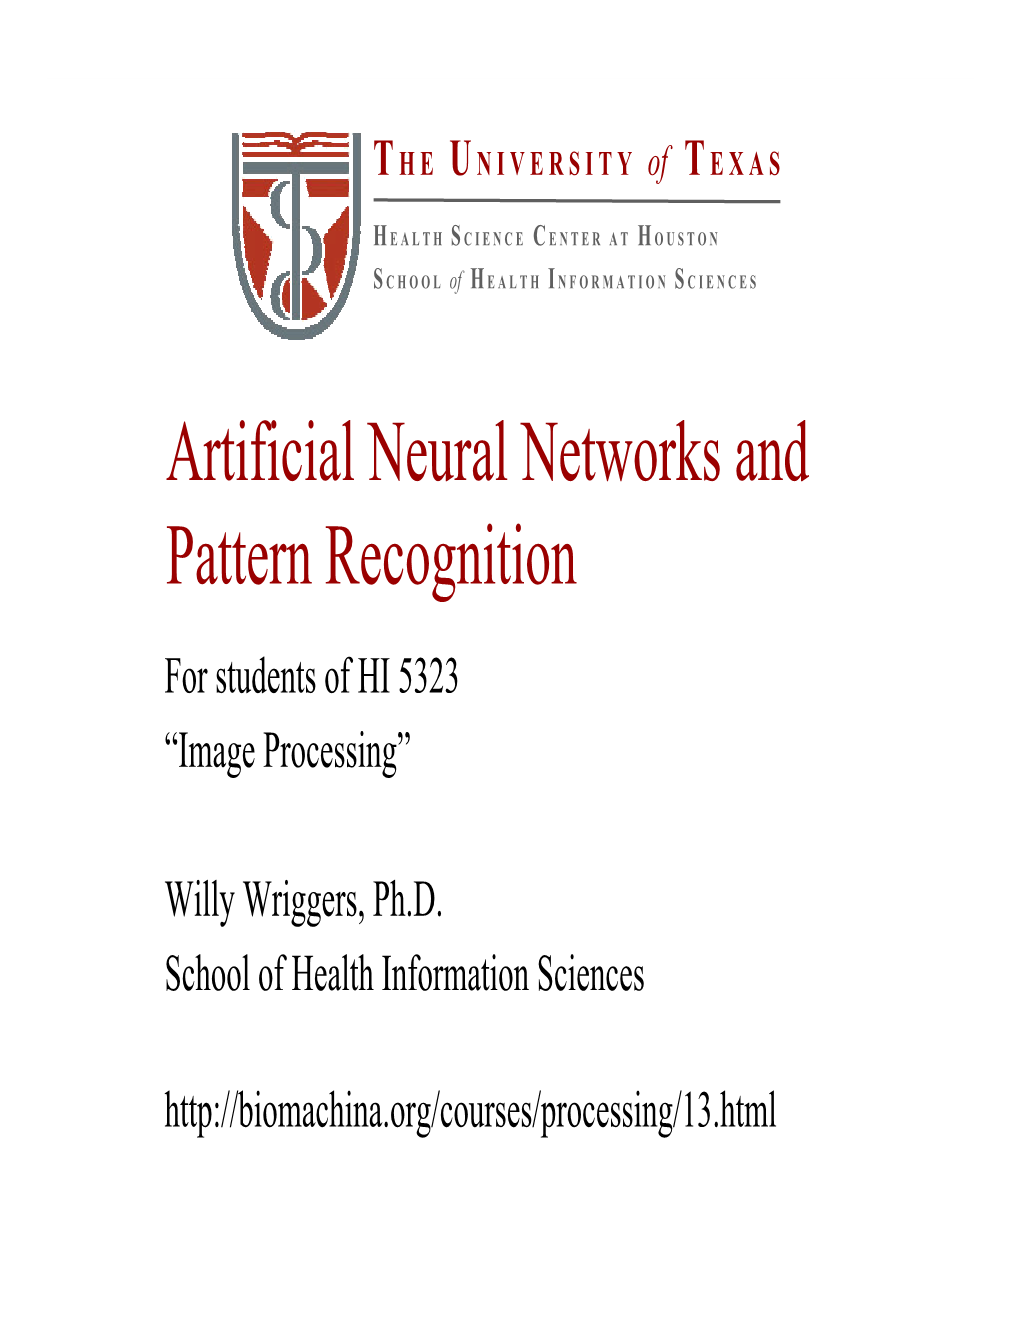 Artificial Neural Networks and Pattern Recognition for Students of HI 5323 “Image Processing”